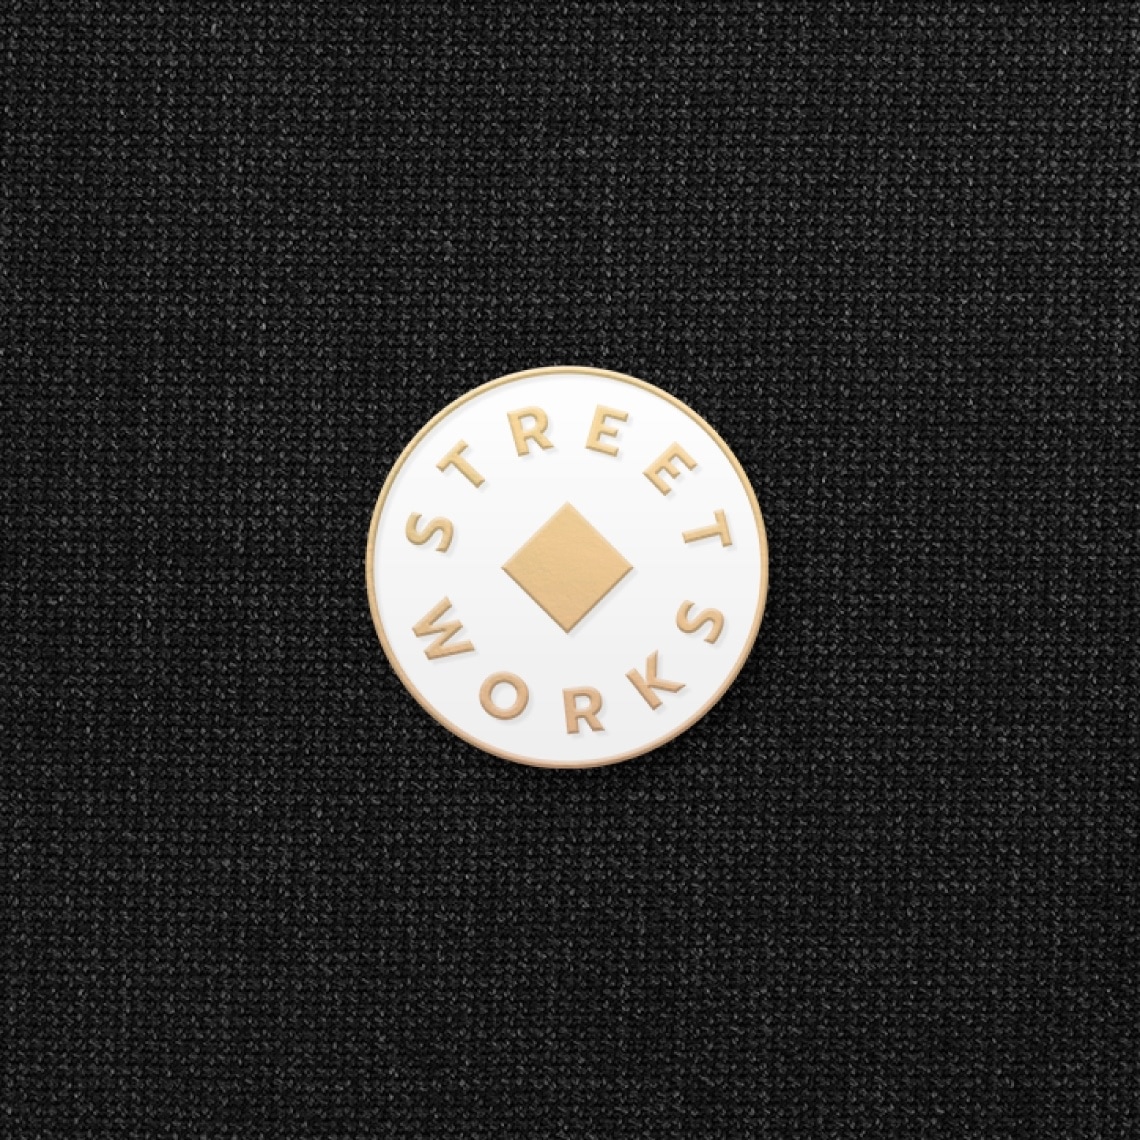 a white and gold pin with the logo of Street Works over a textured black fabric